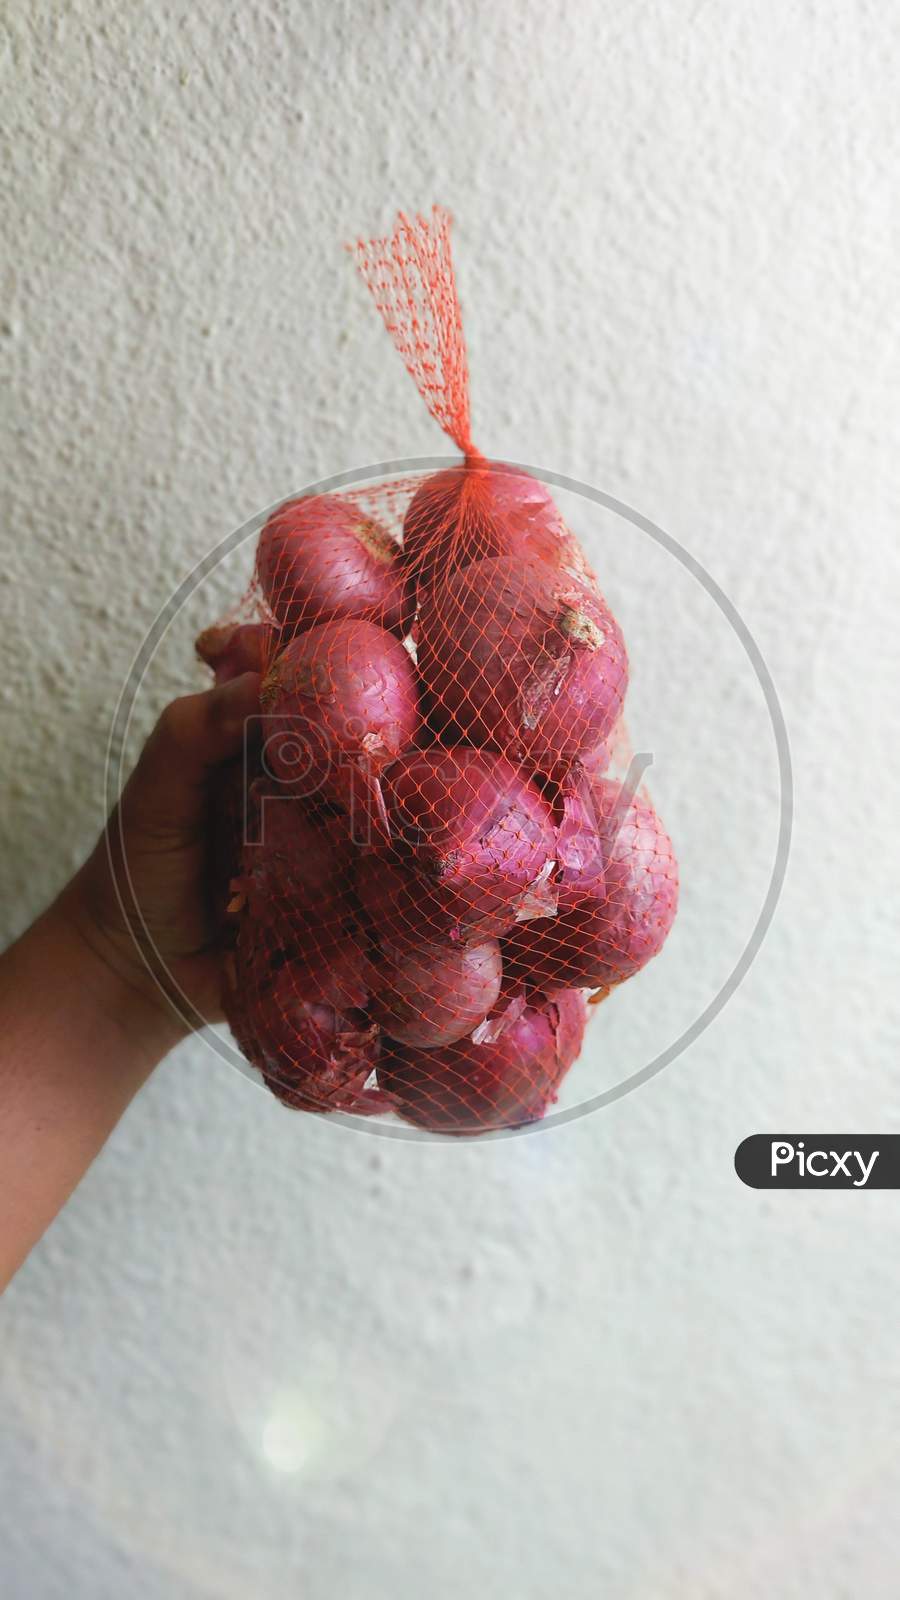 Onion bag from vegetable market.